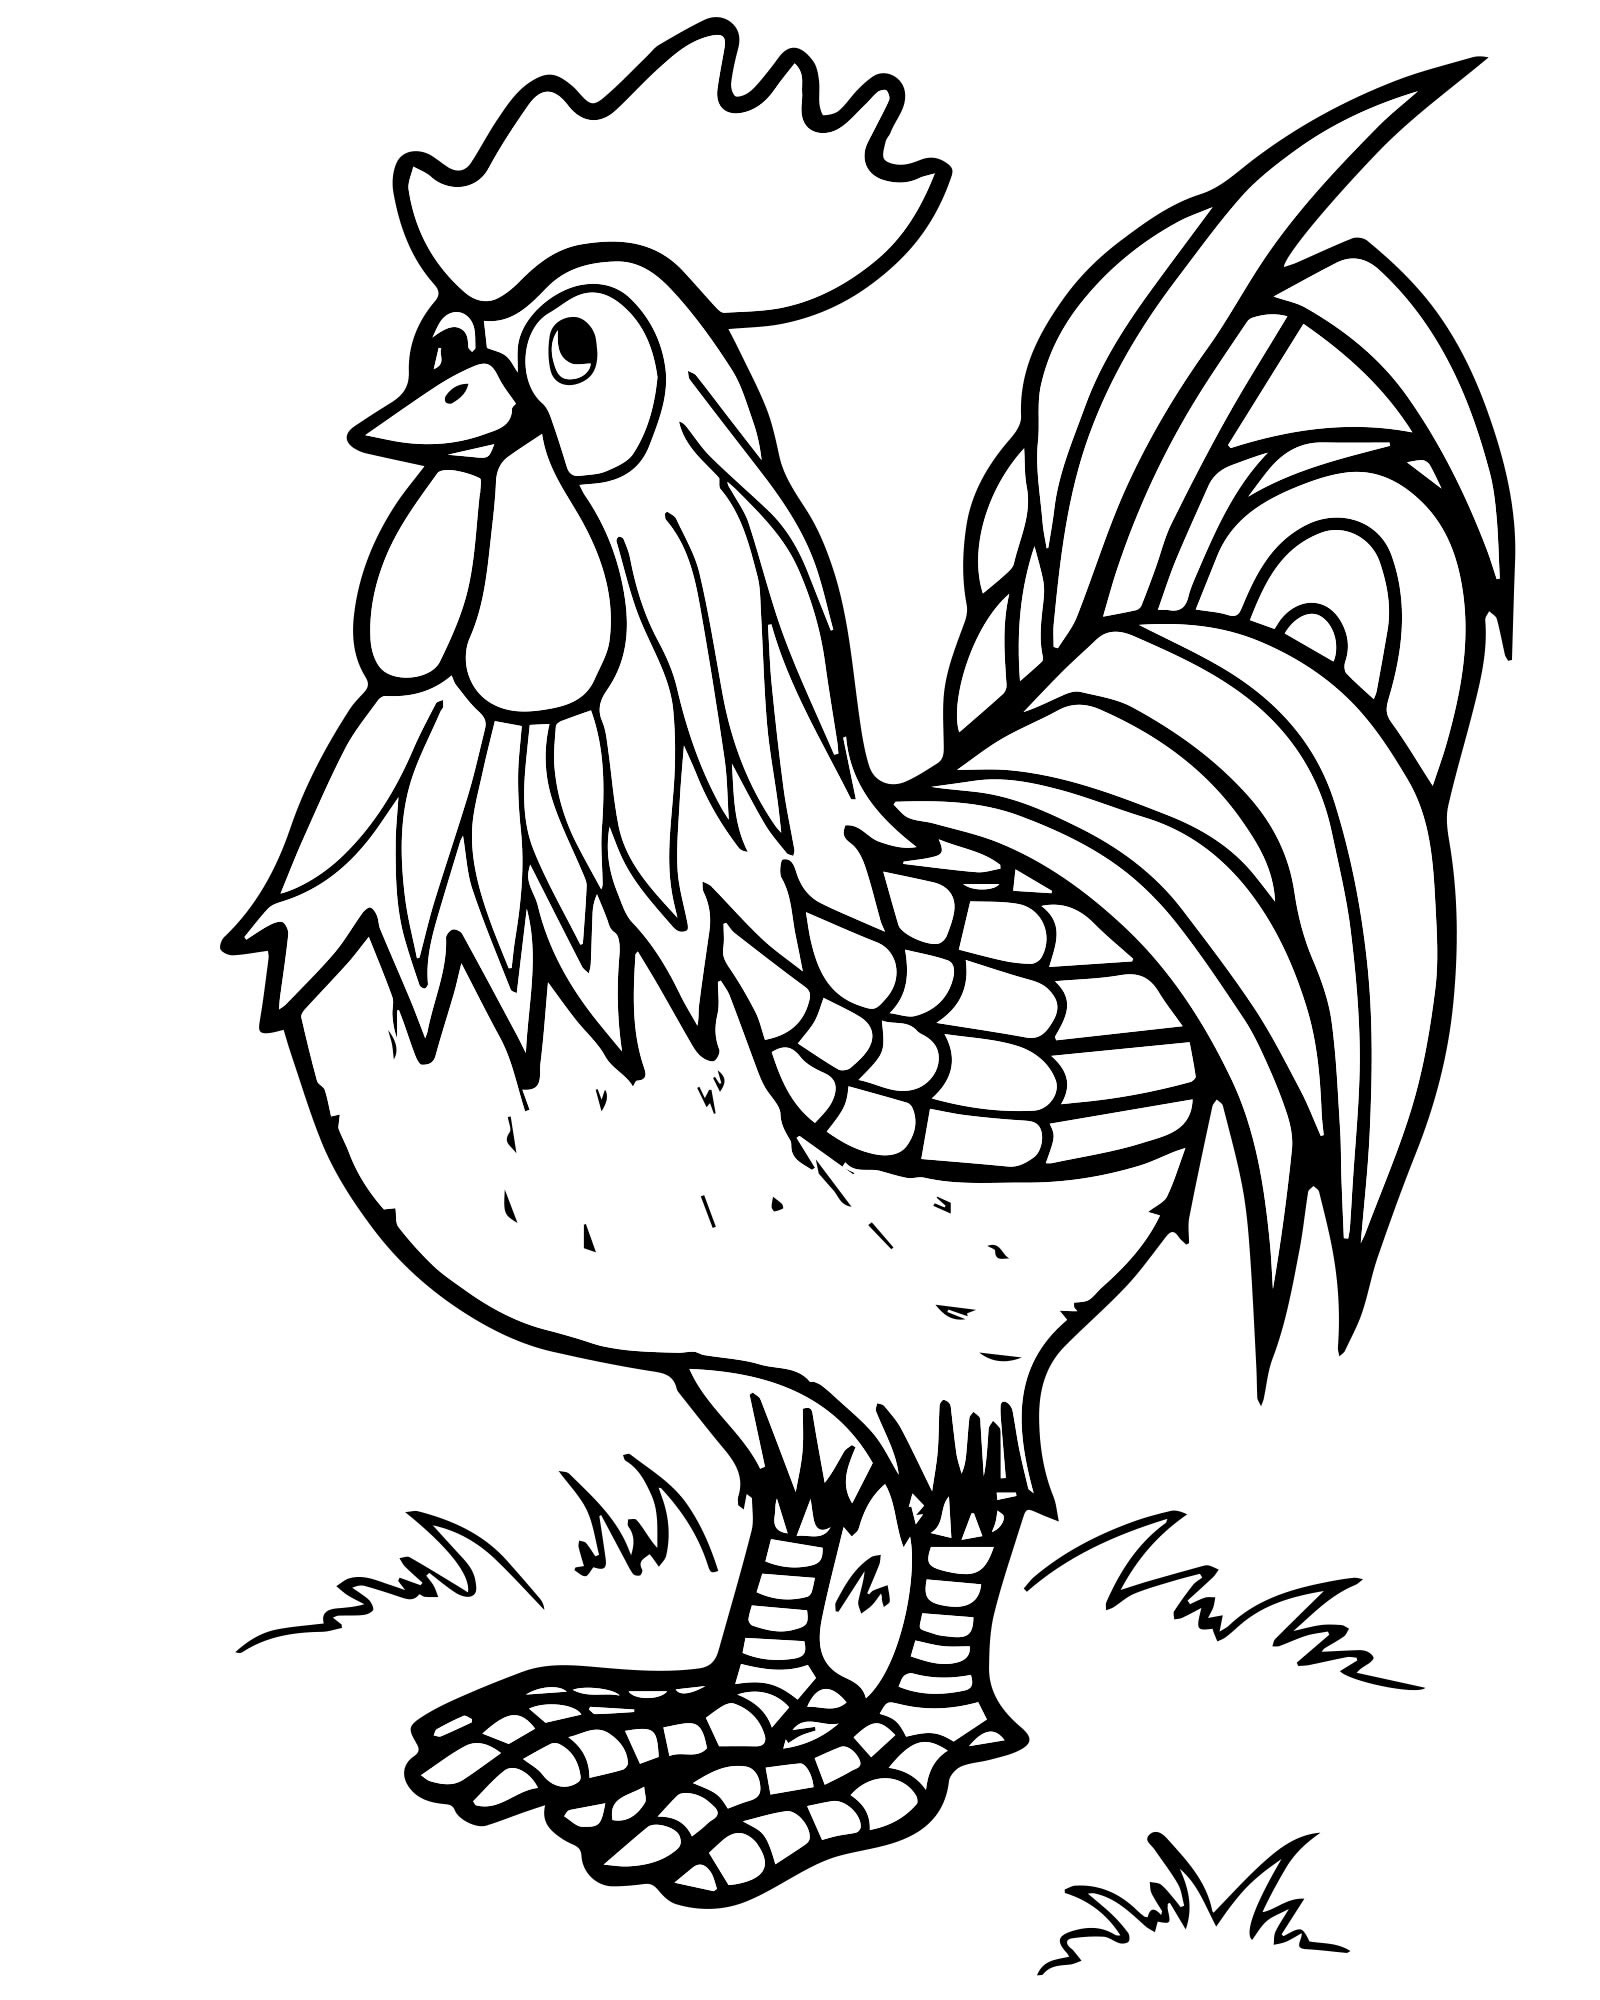 Coloring book energetic rooster for children 4-5 years old